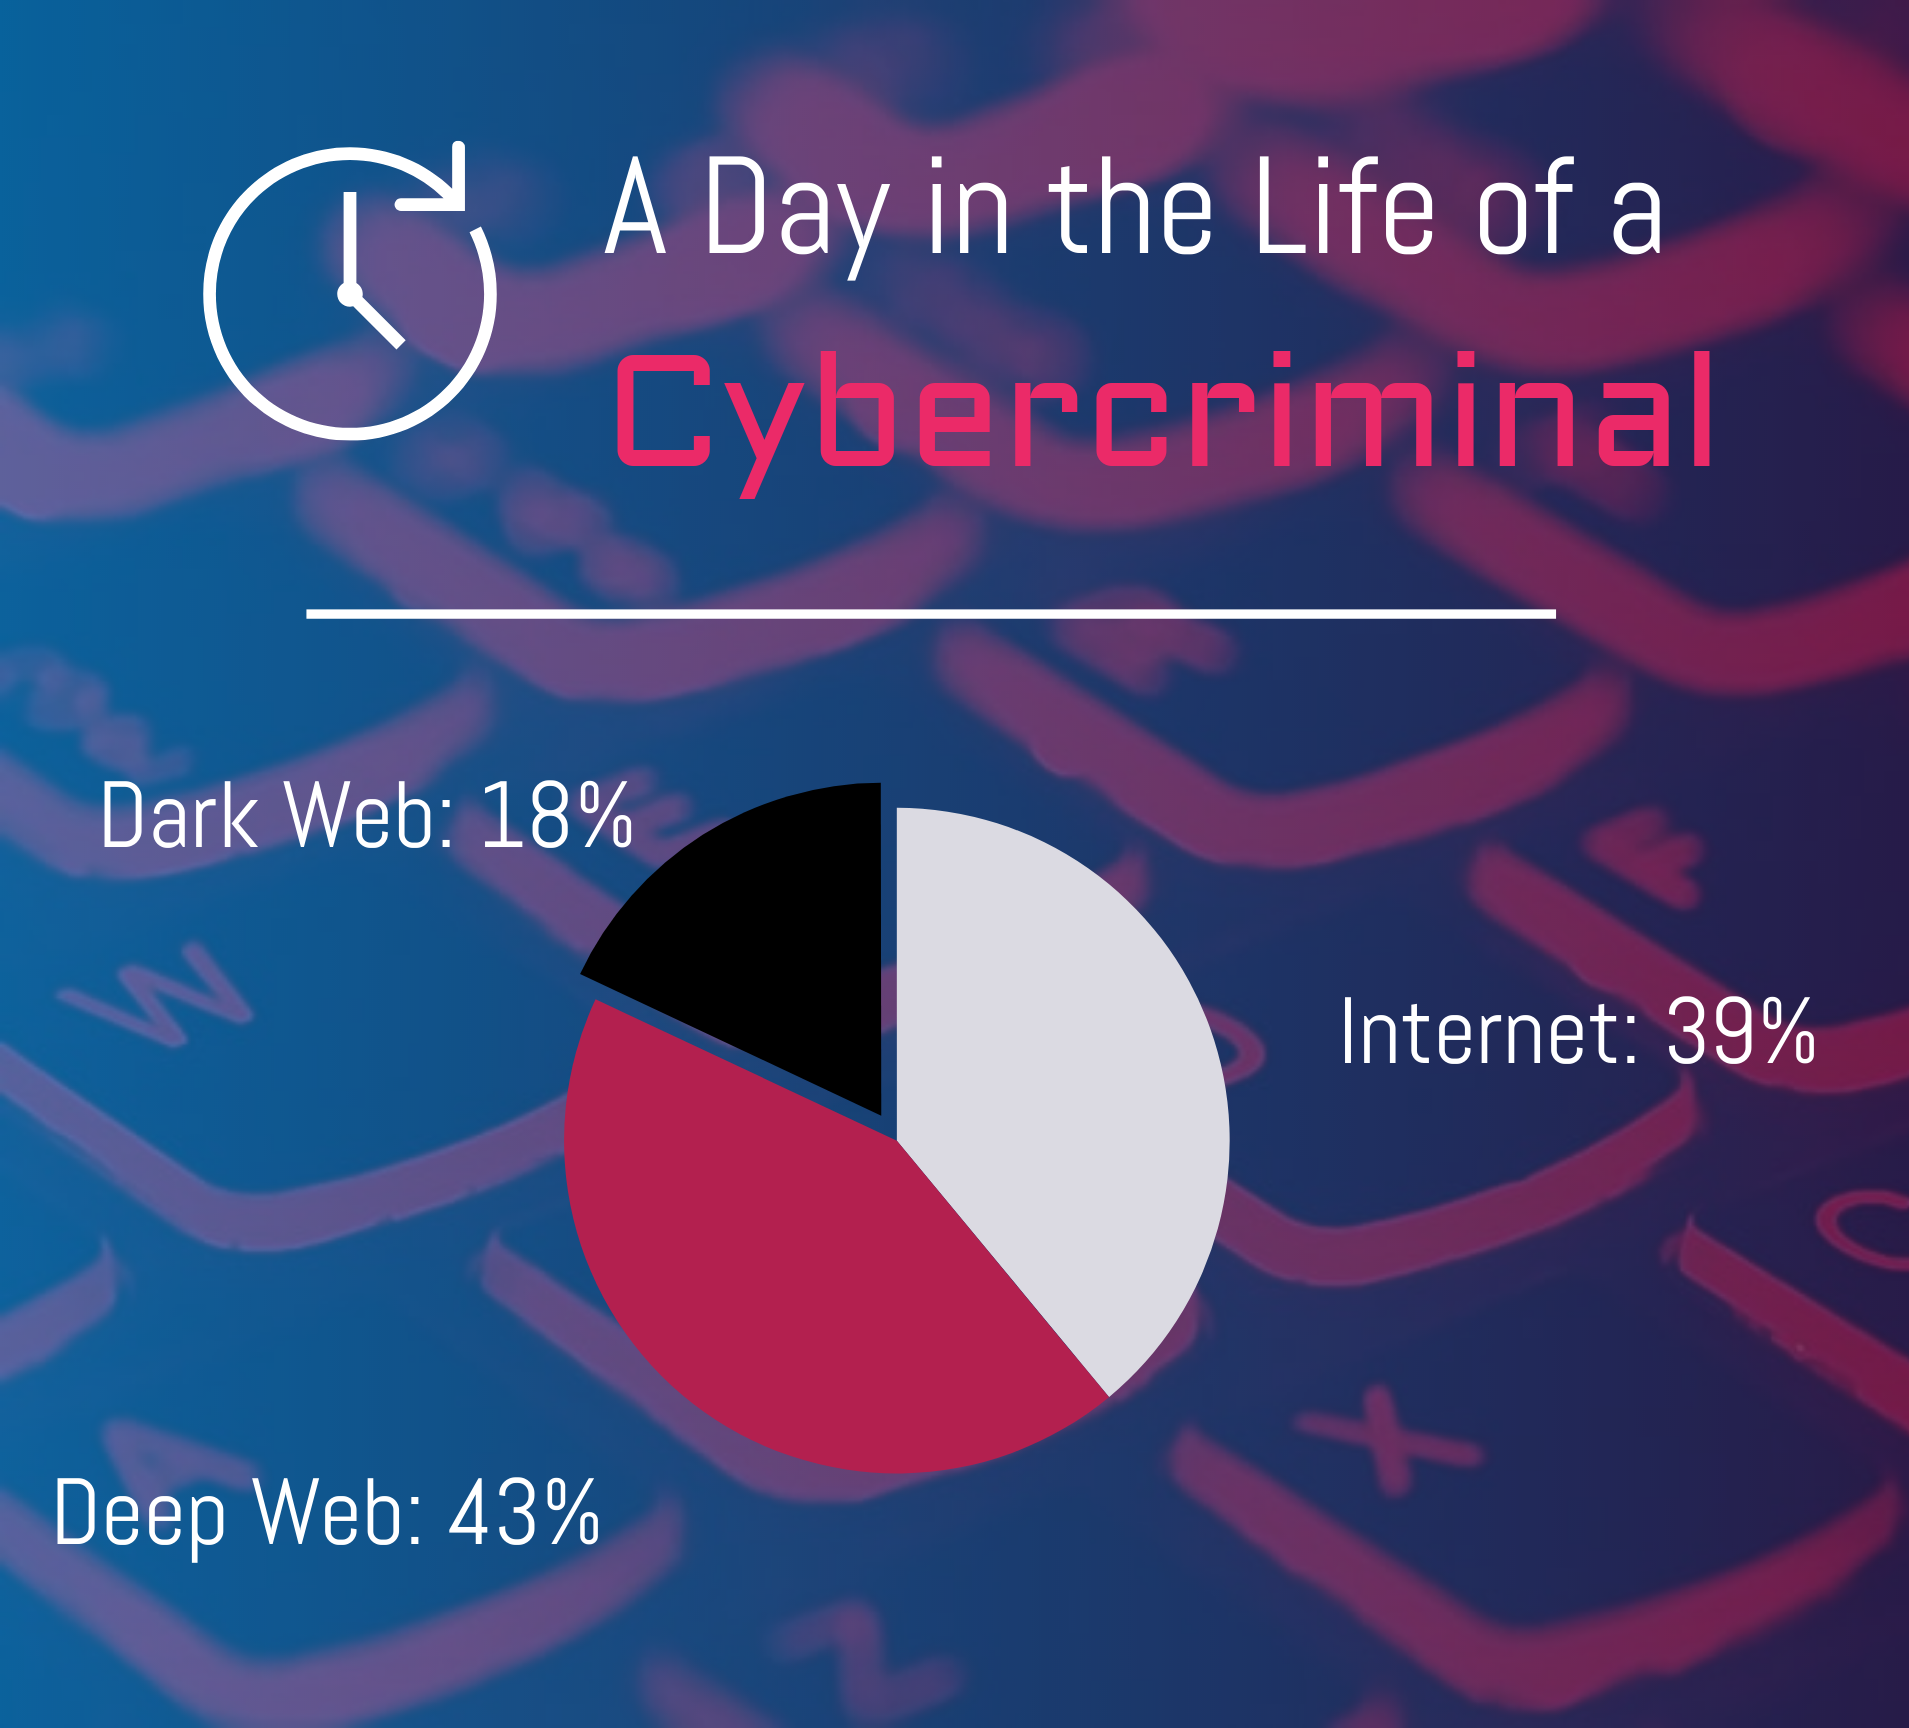 A Day in the Life of a Cybercriminal